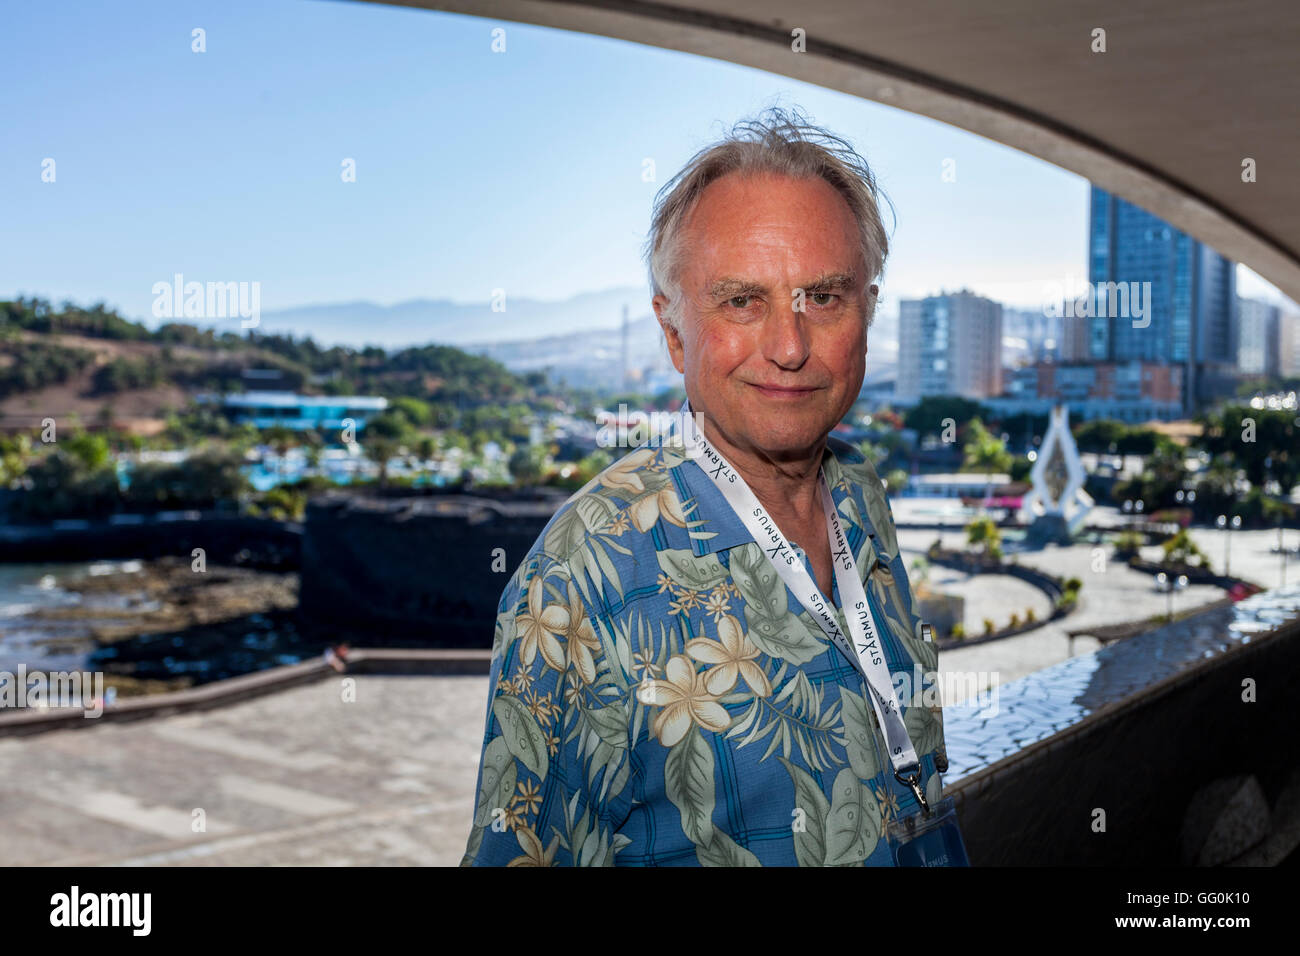 Clinton Richard Dawkins FRS FRSL at Starmus Festival, Tenerife. He is an English ethologist, evolutionary biologist and author. Stock Photo